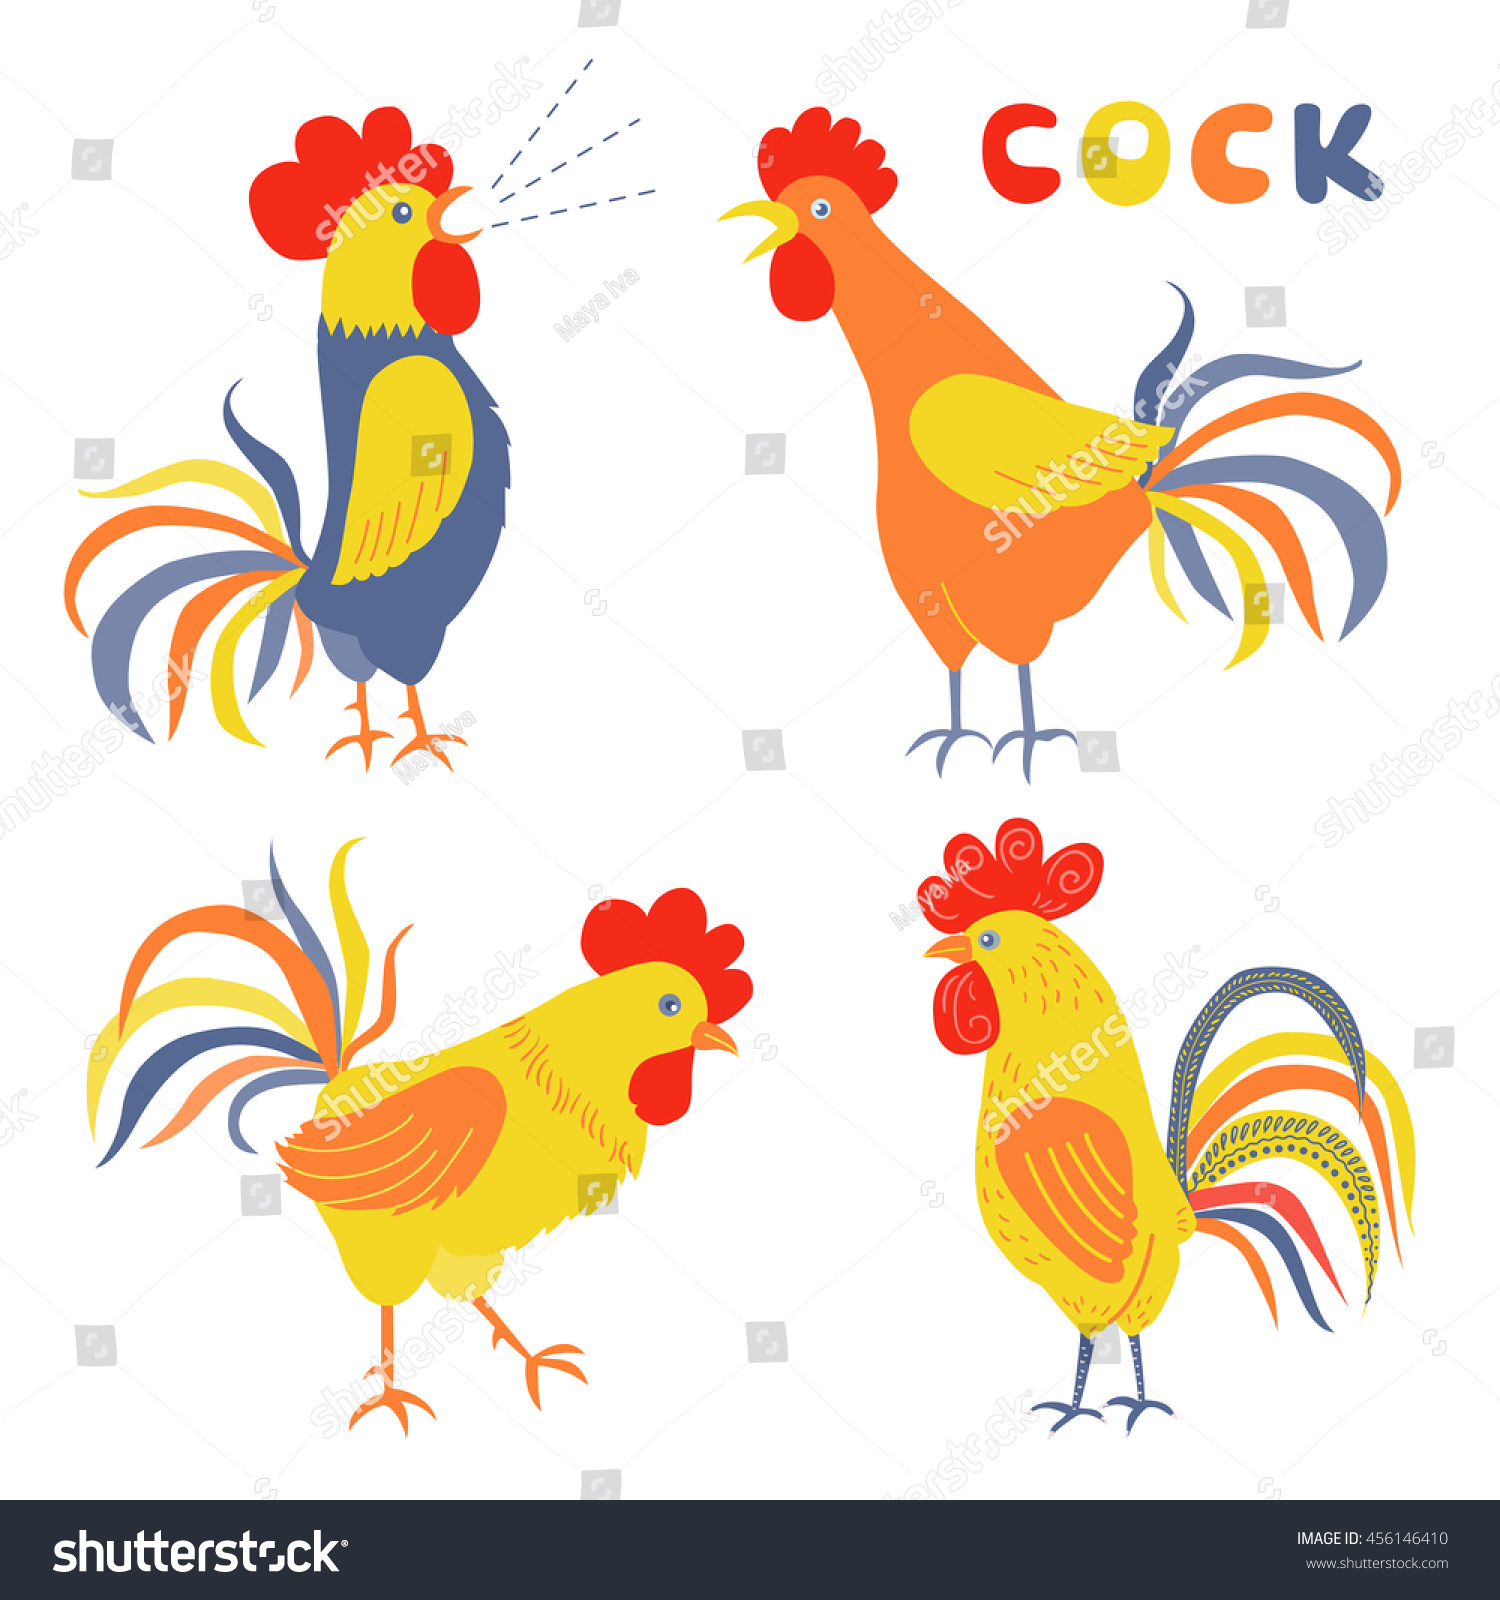 SVG of Four lovely cockerels on a white background. Illustration in flat style. Cocks crowing. Cock-a-doodle-doo . Rooster symbol of Chinese New Year svg